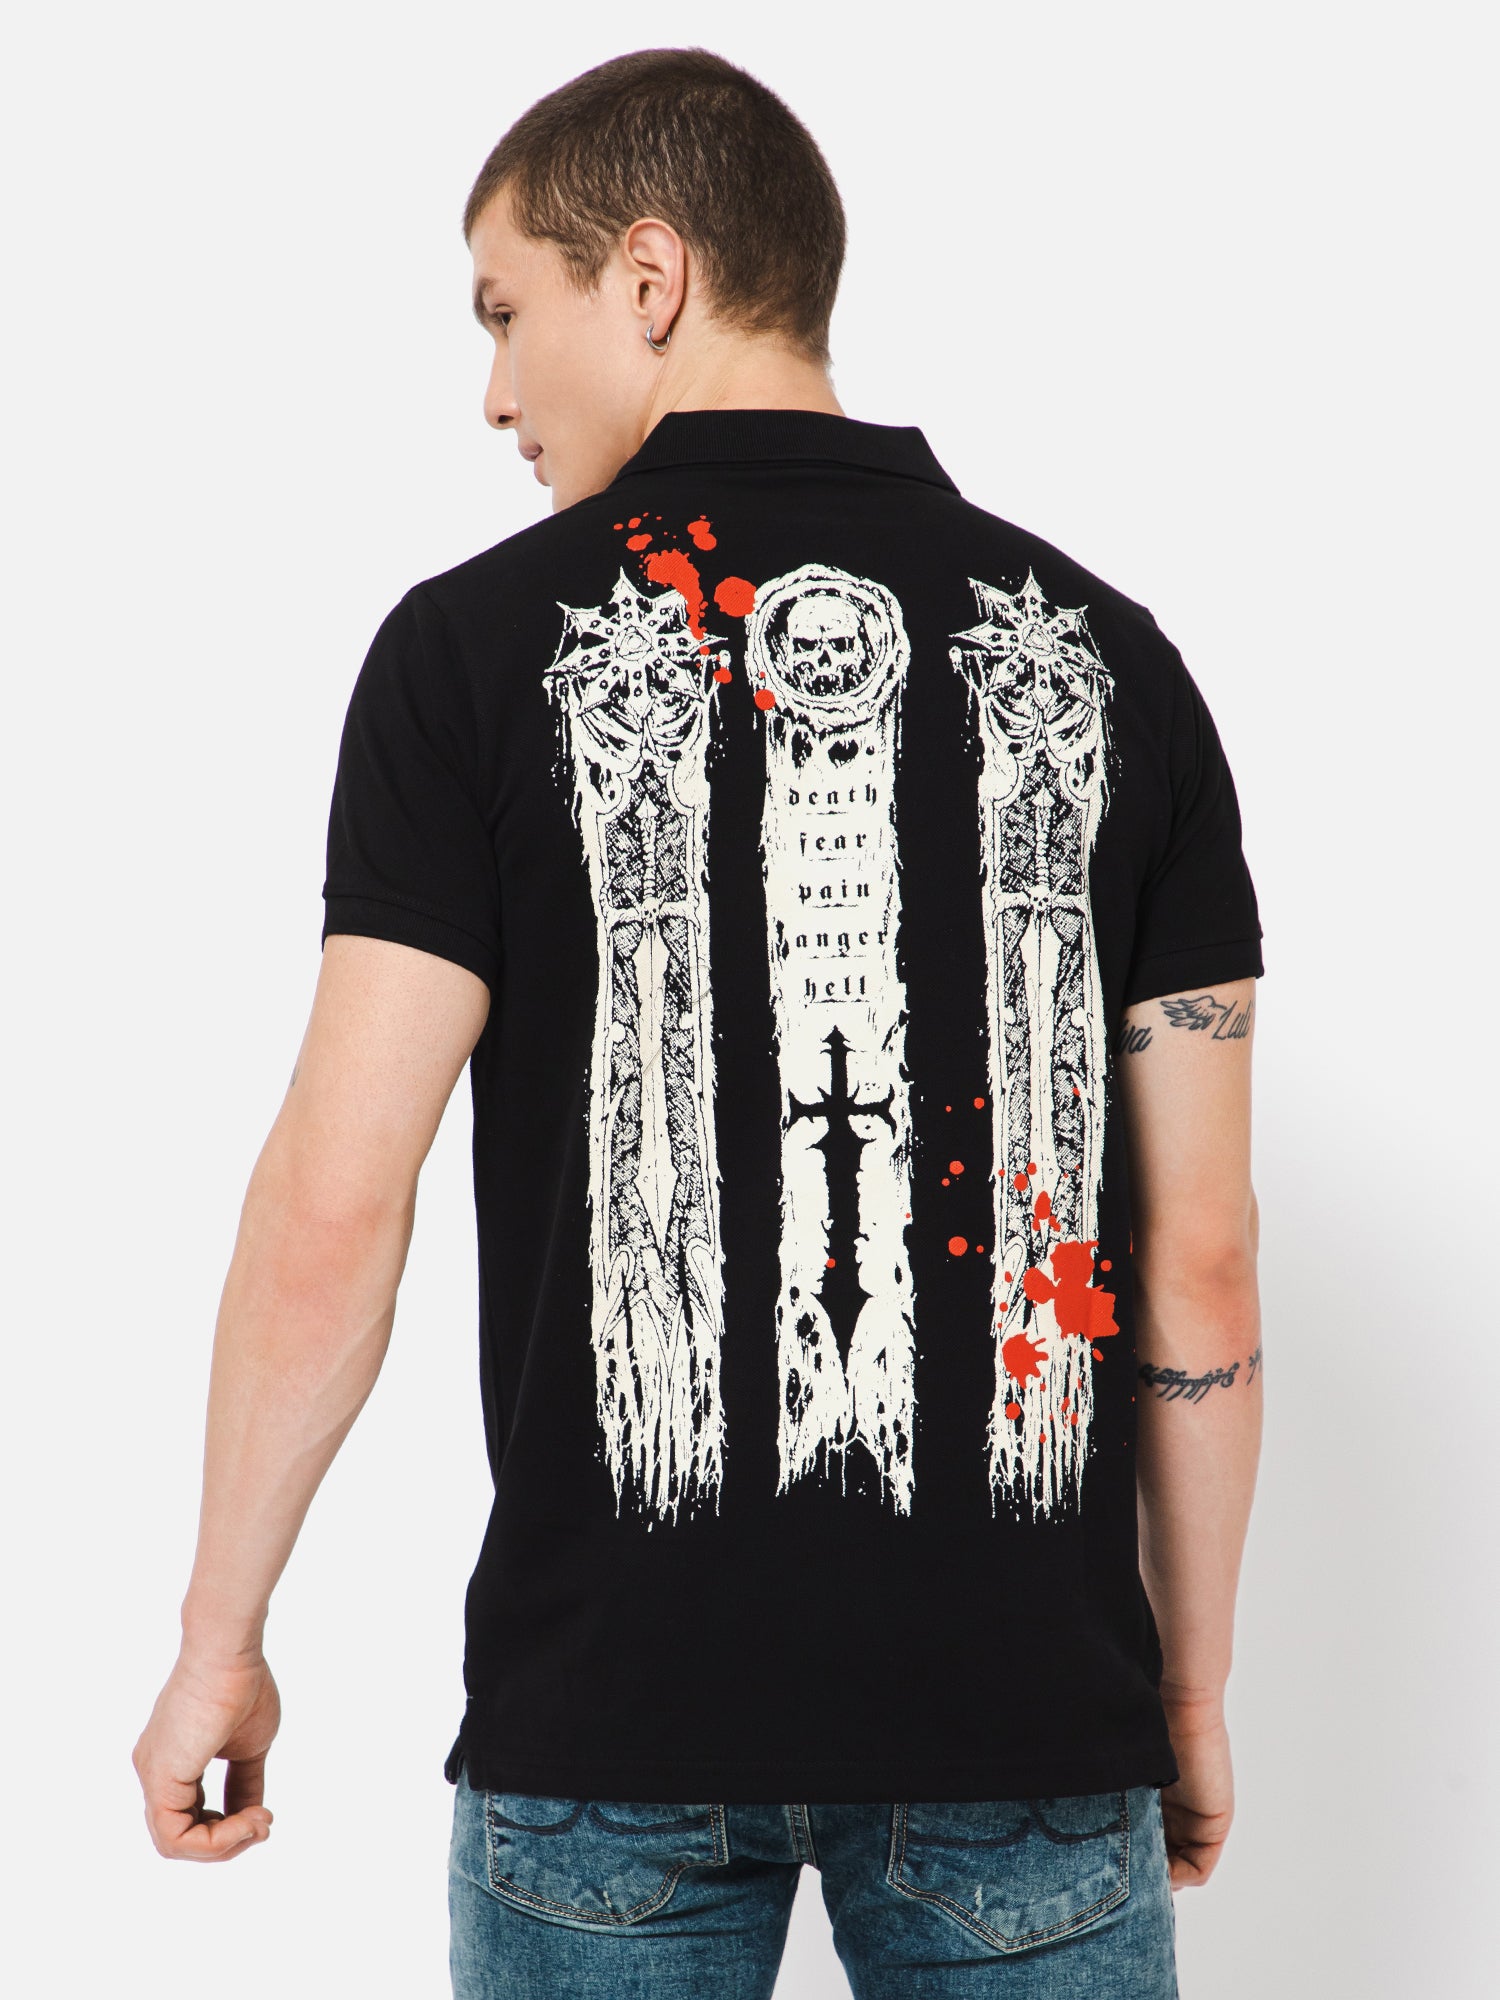 Buy Gothic Tshirt Online In India -  India